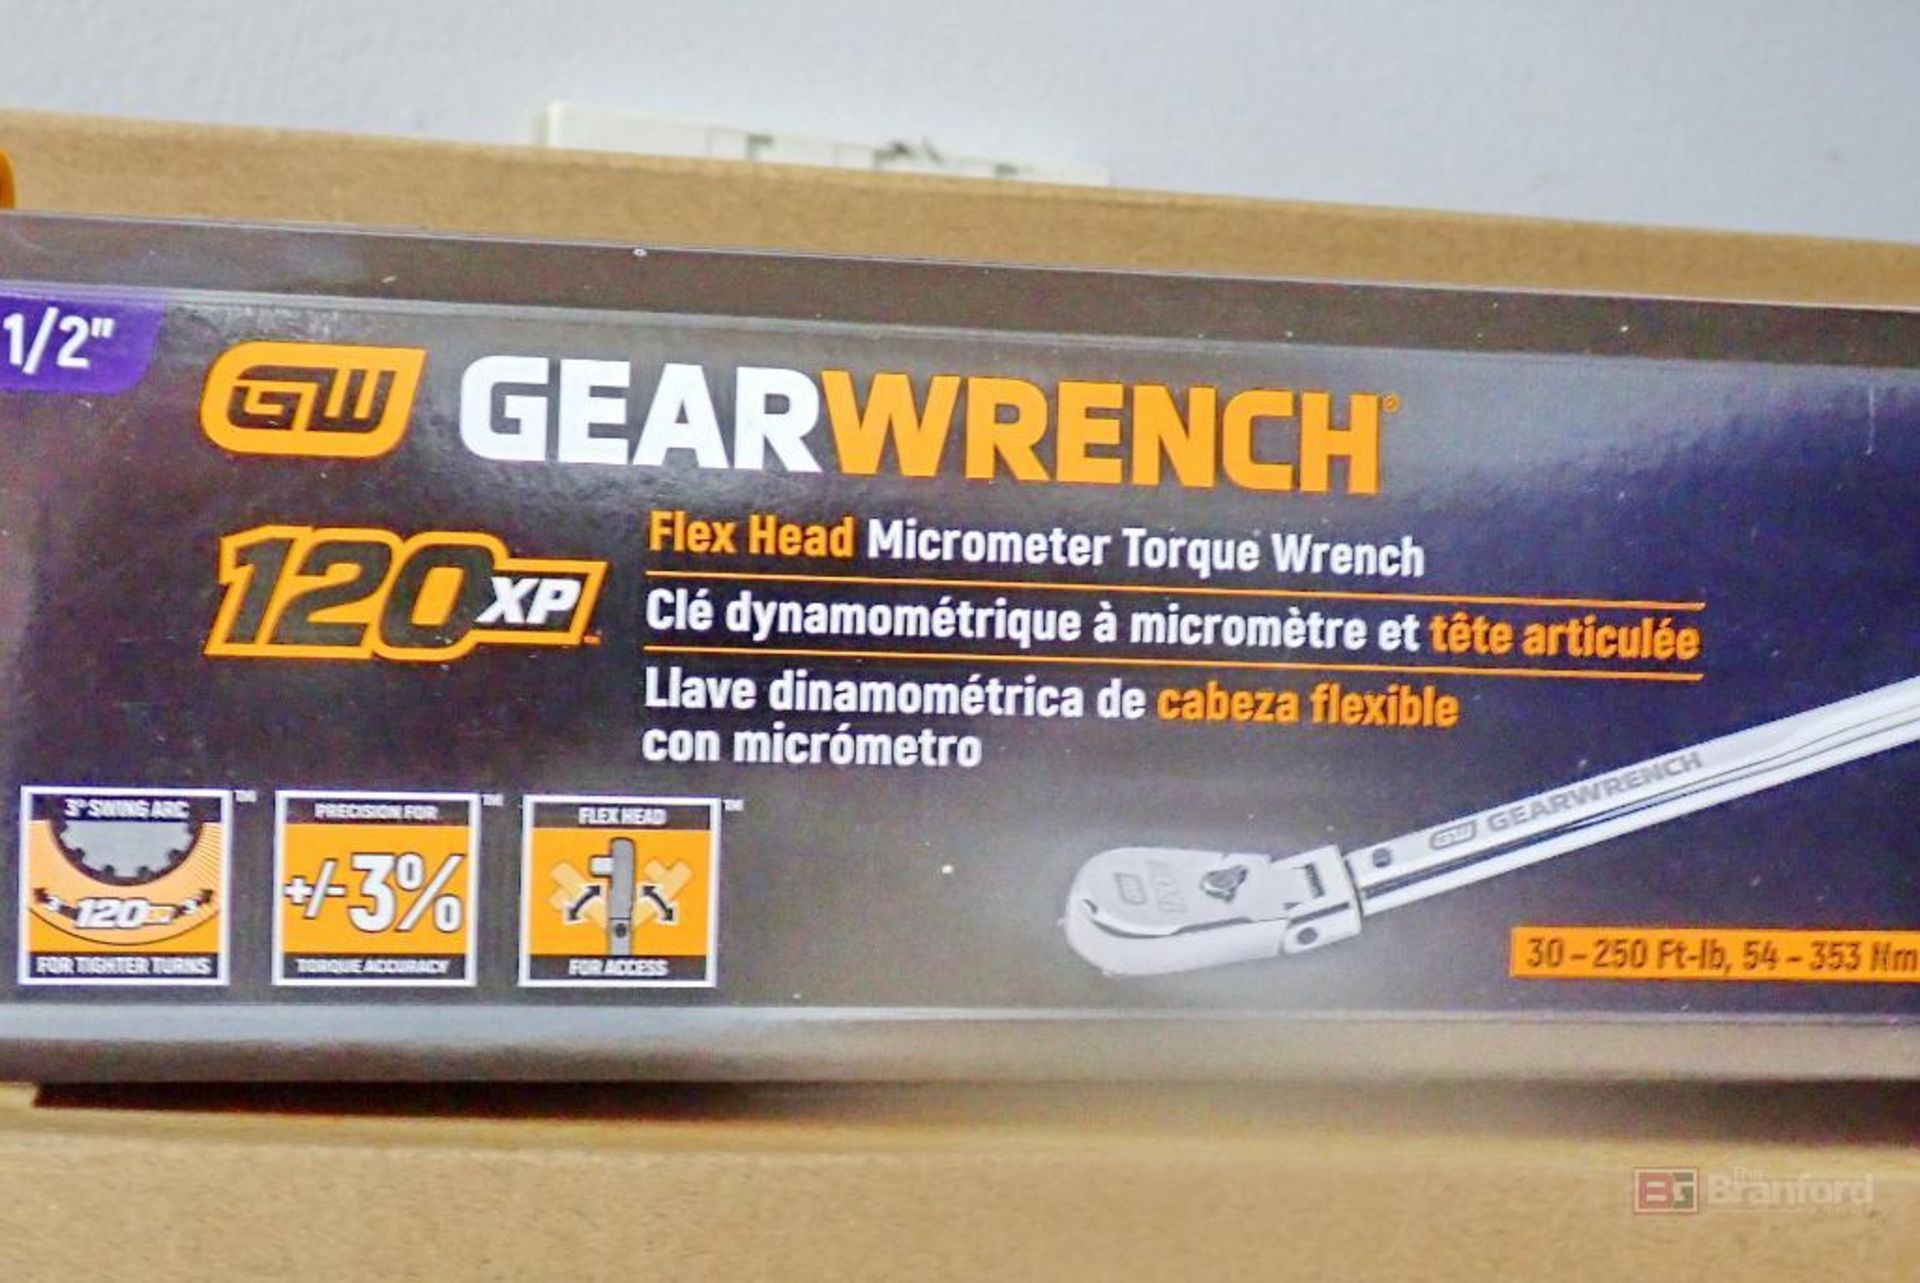 GearWrench 85189 120XP 1/2" Drive Flex Head Micrometer Torque Wrench - Image 2 of 2